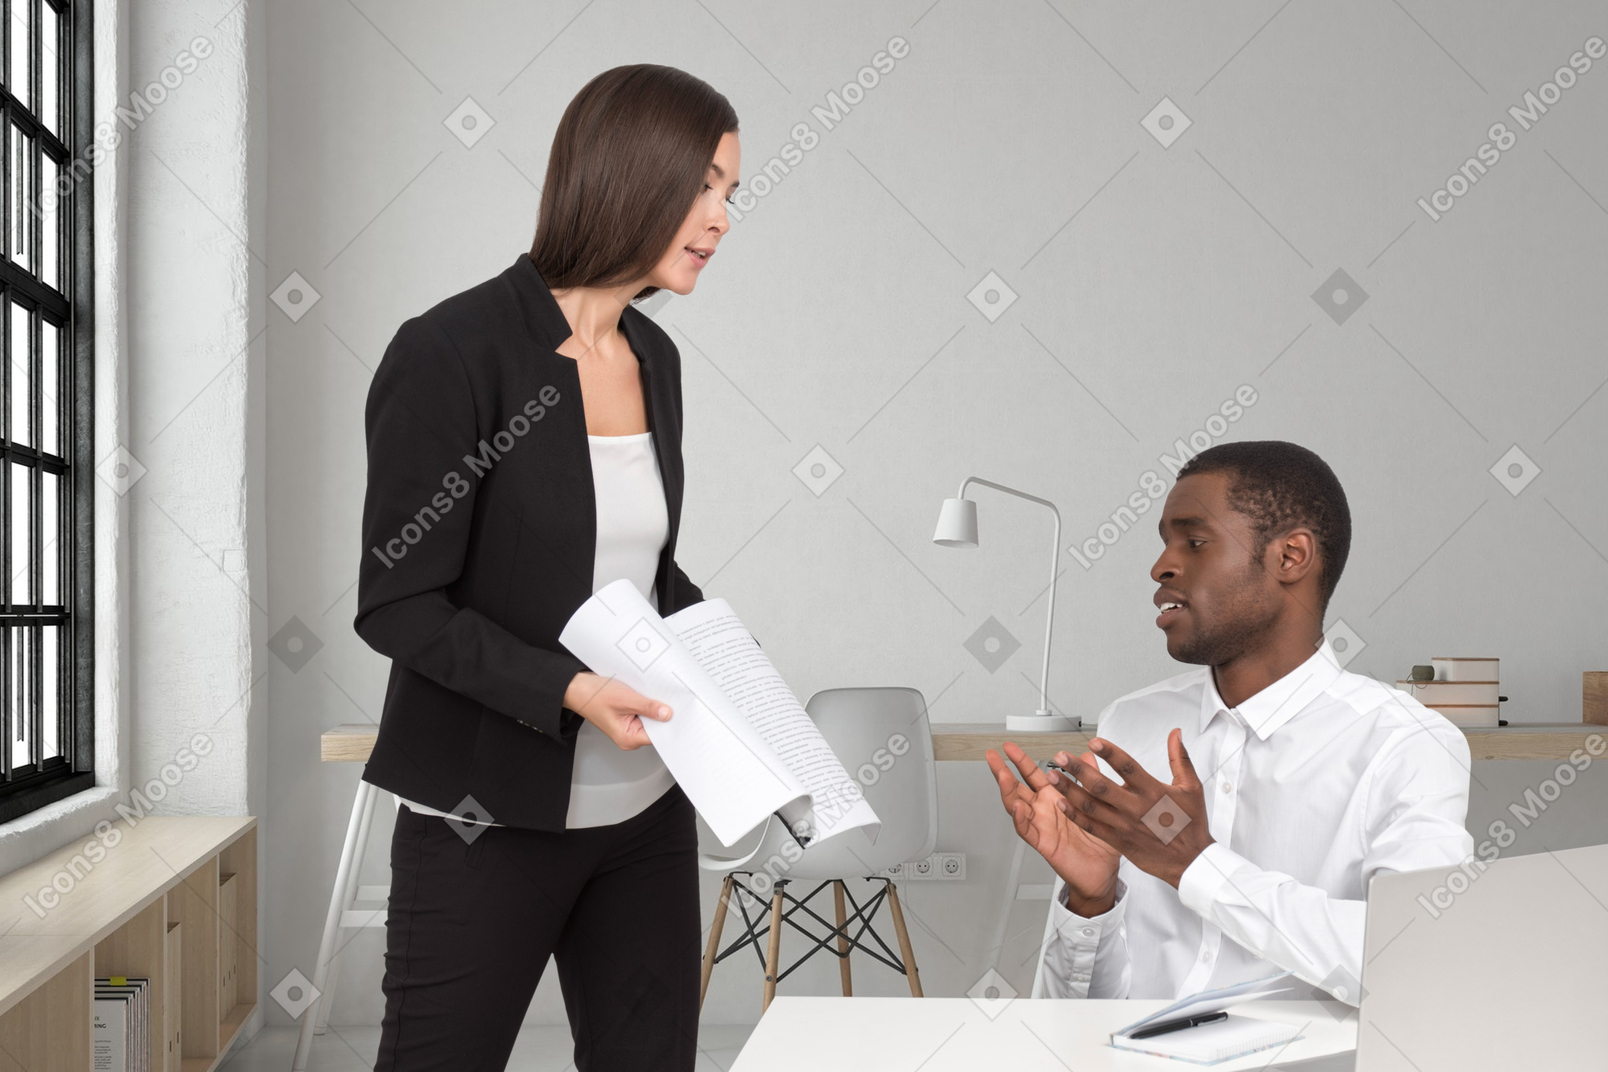 A man and woman talking at a desk